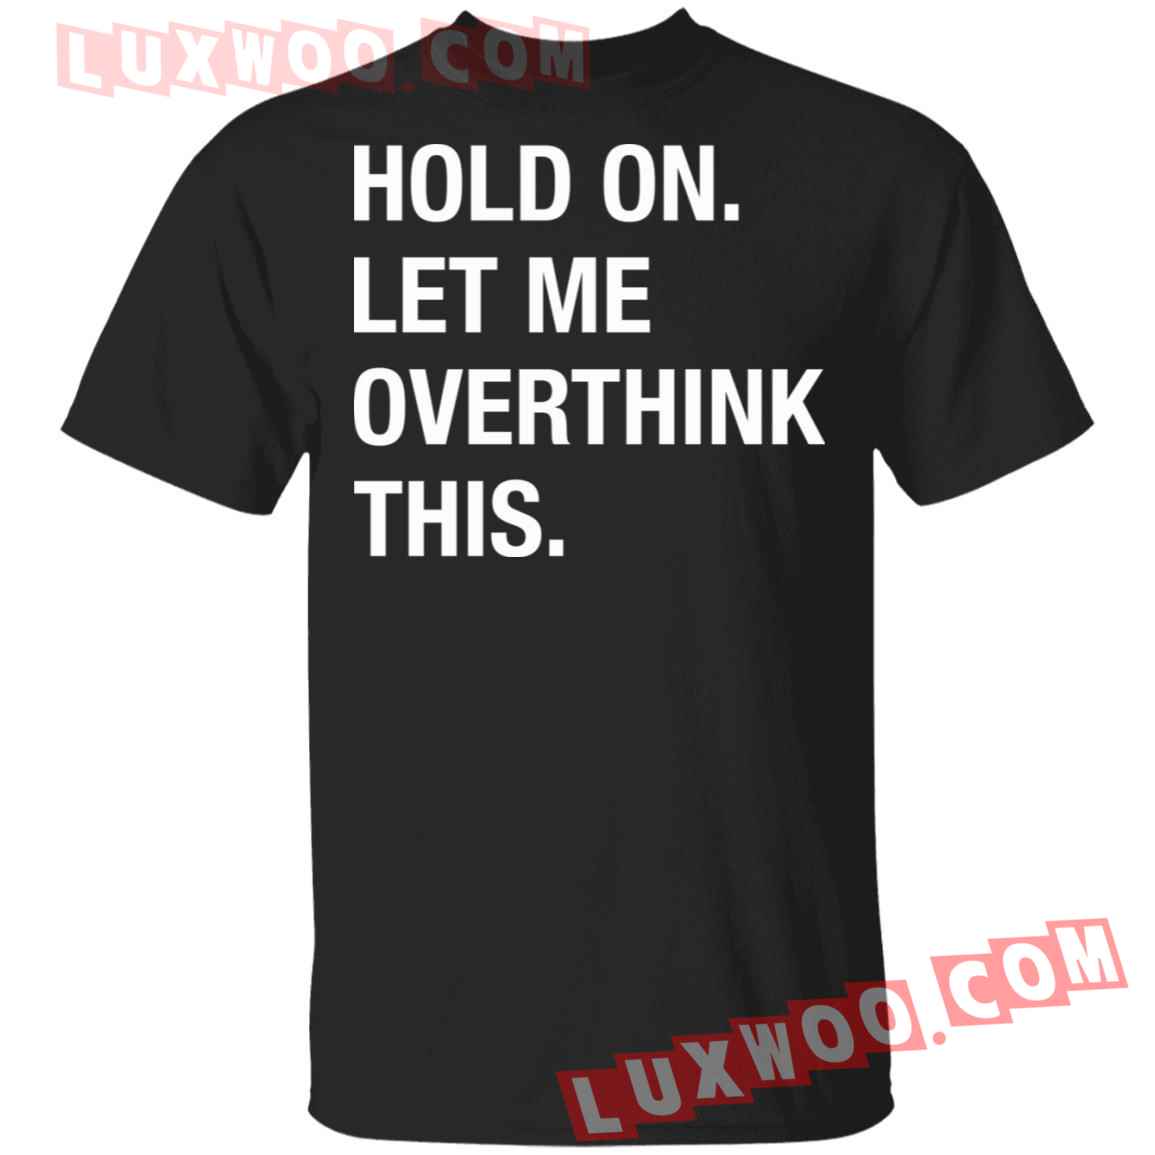 Hold On Let Me Overthink This Shirt - Luxwoo.com